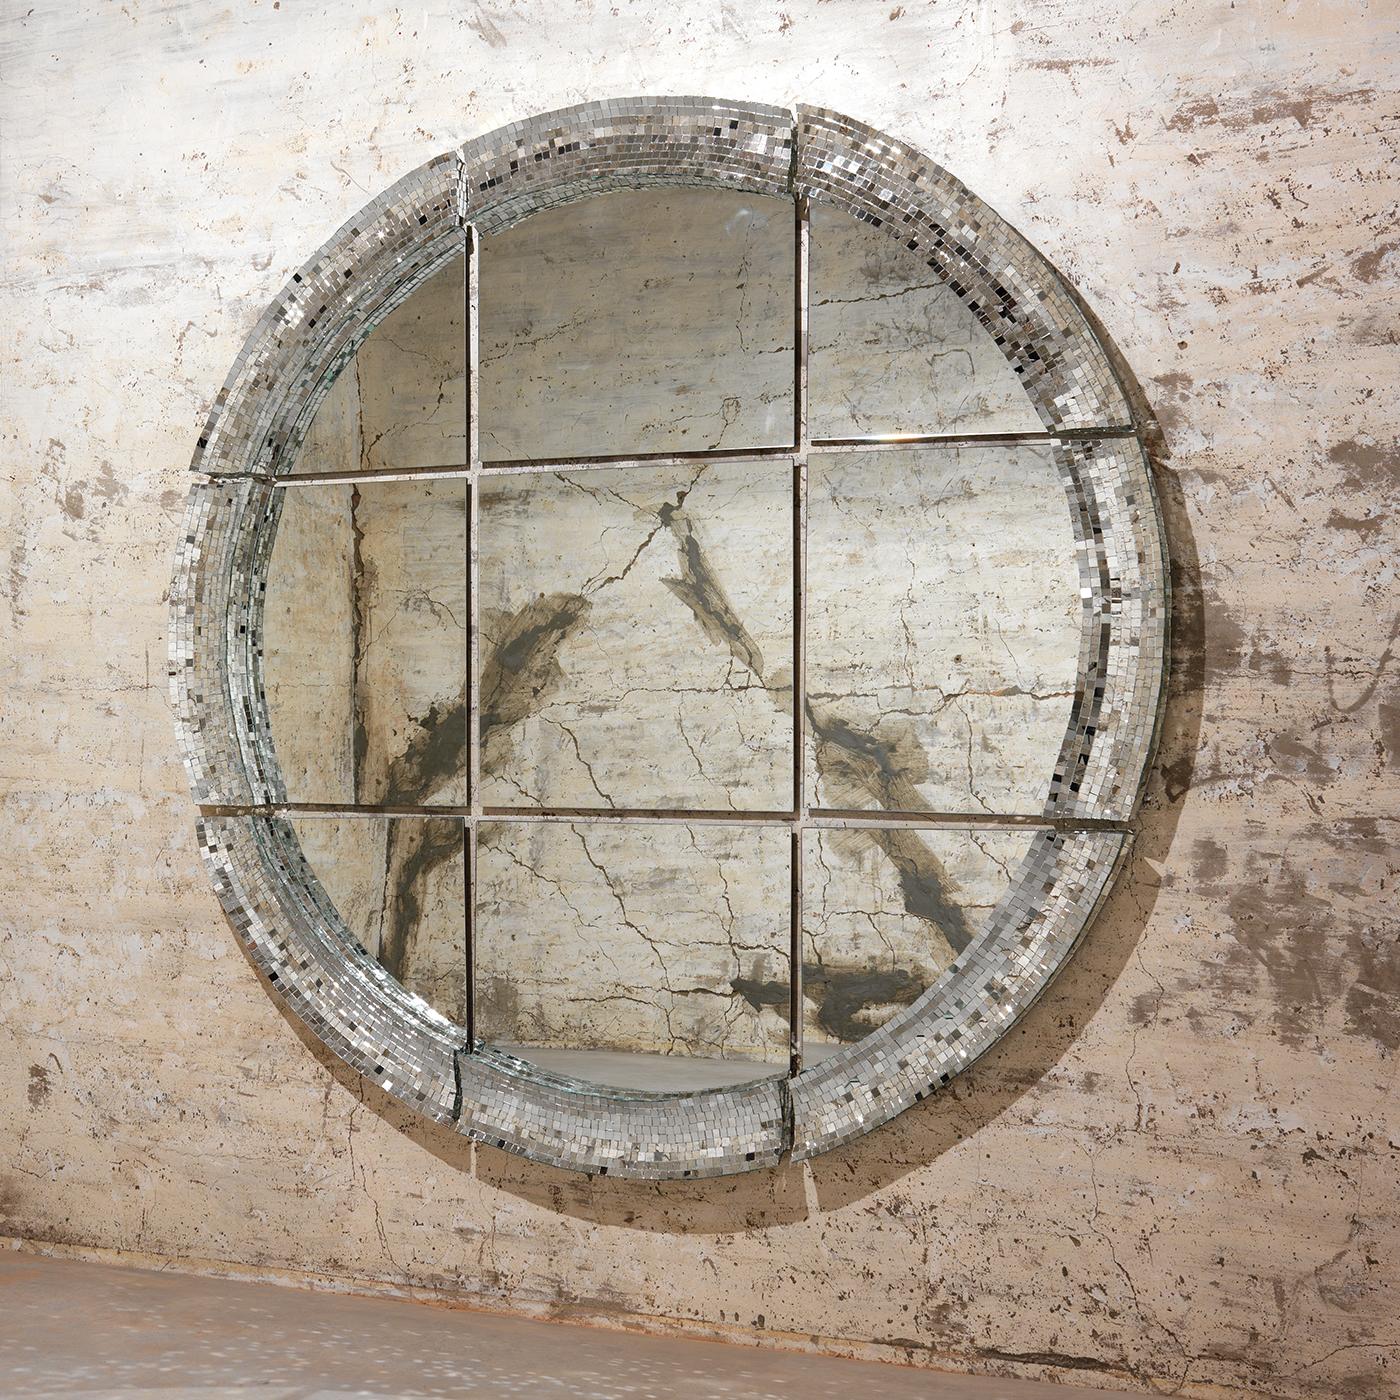 A true protagonist in any interior, this mirror reveals the elegance and suggestive power of two elements - mosaic and mirror - that merge in a timeless piece of functional decor. Striking as a single decorative accent in a large entryway or living